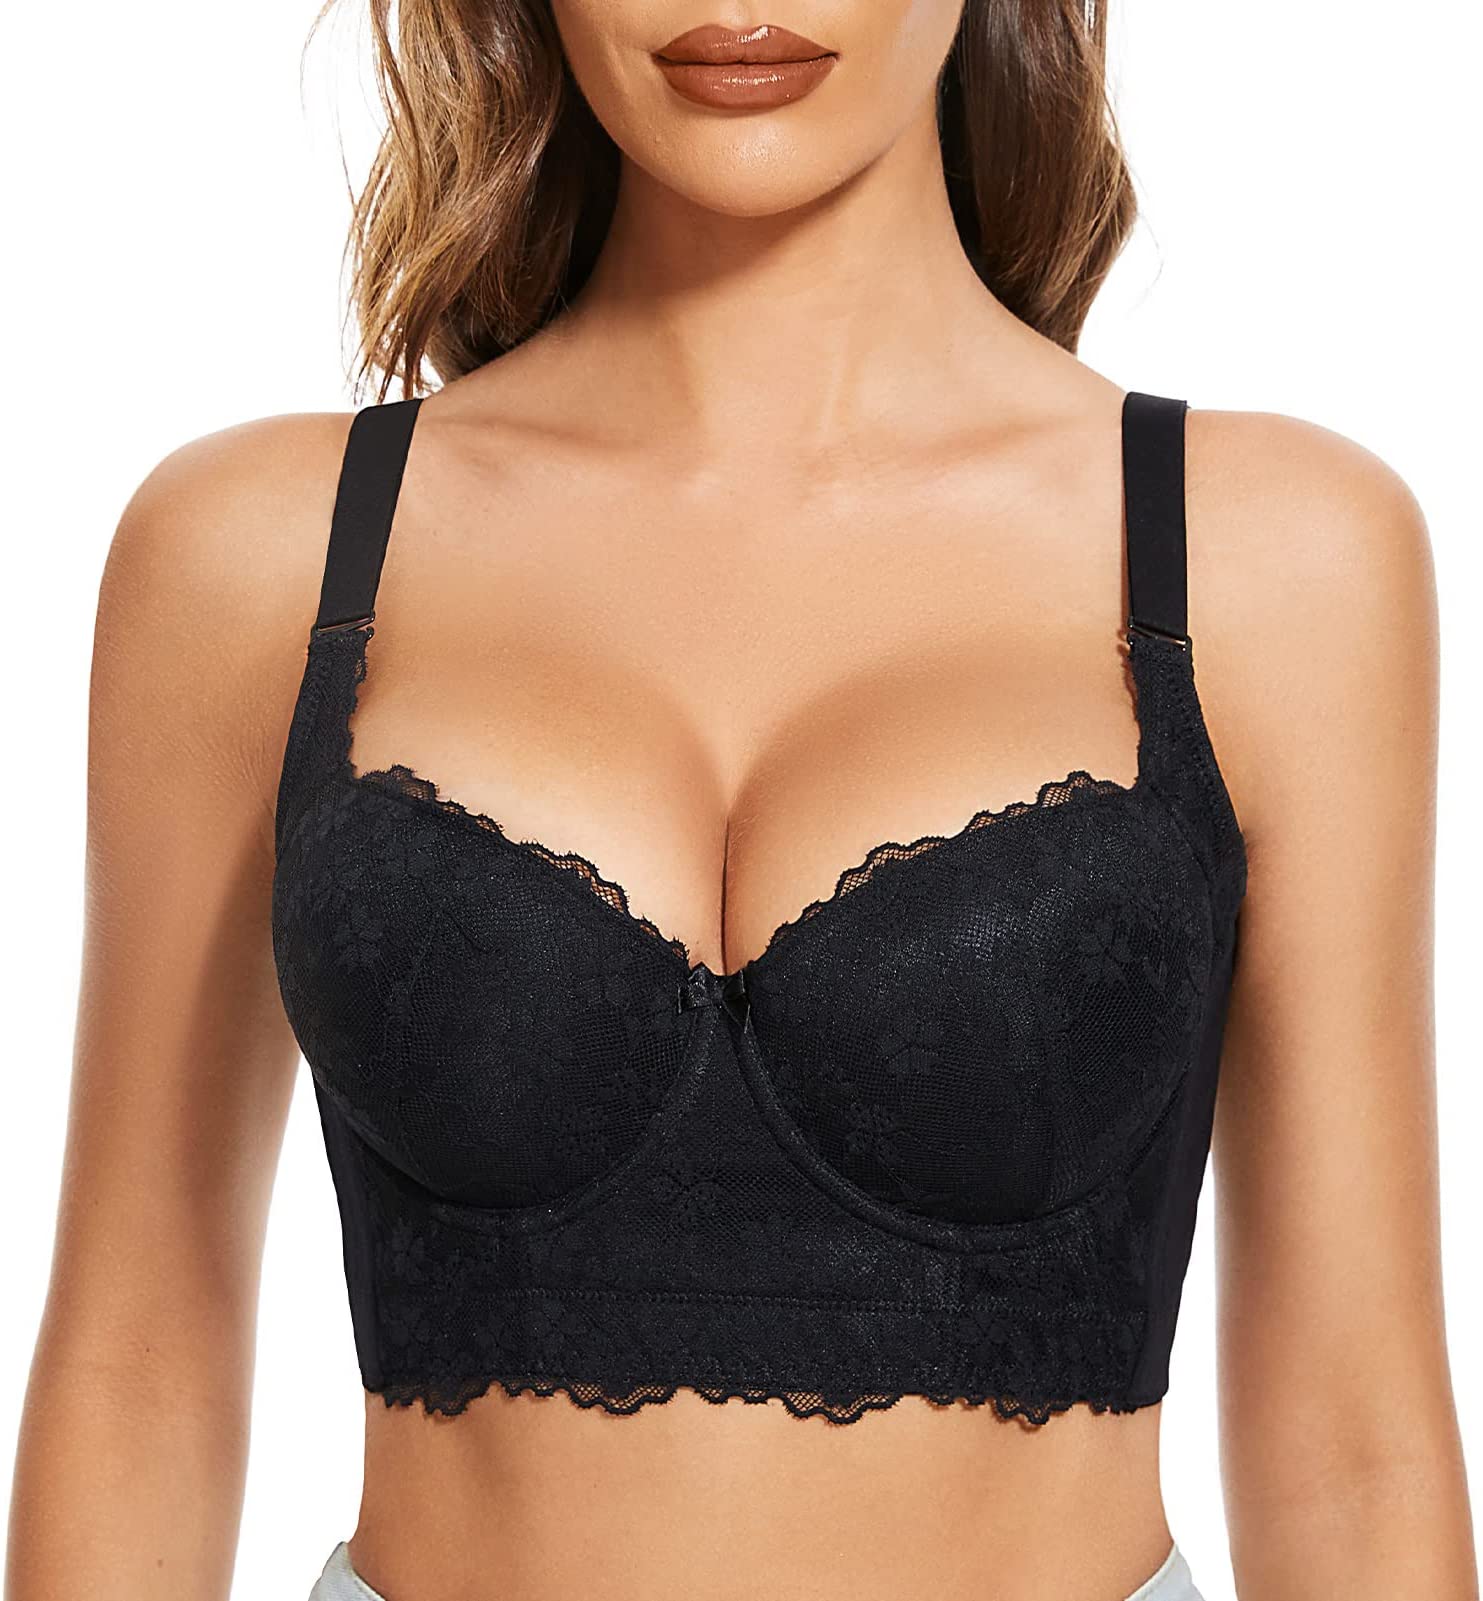 Add One Cup Plus Size Wide Band Push Up Bra